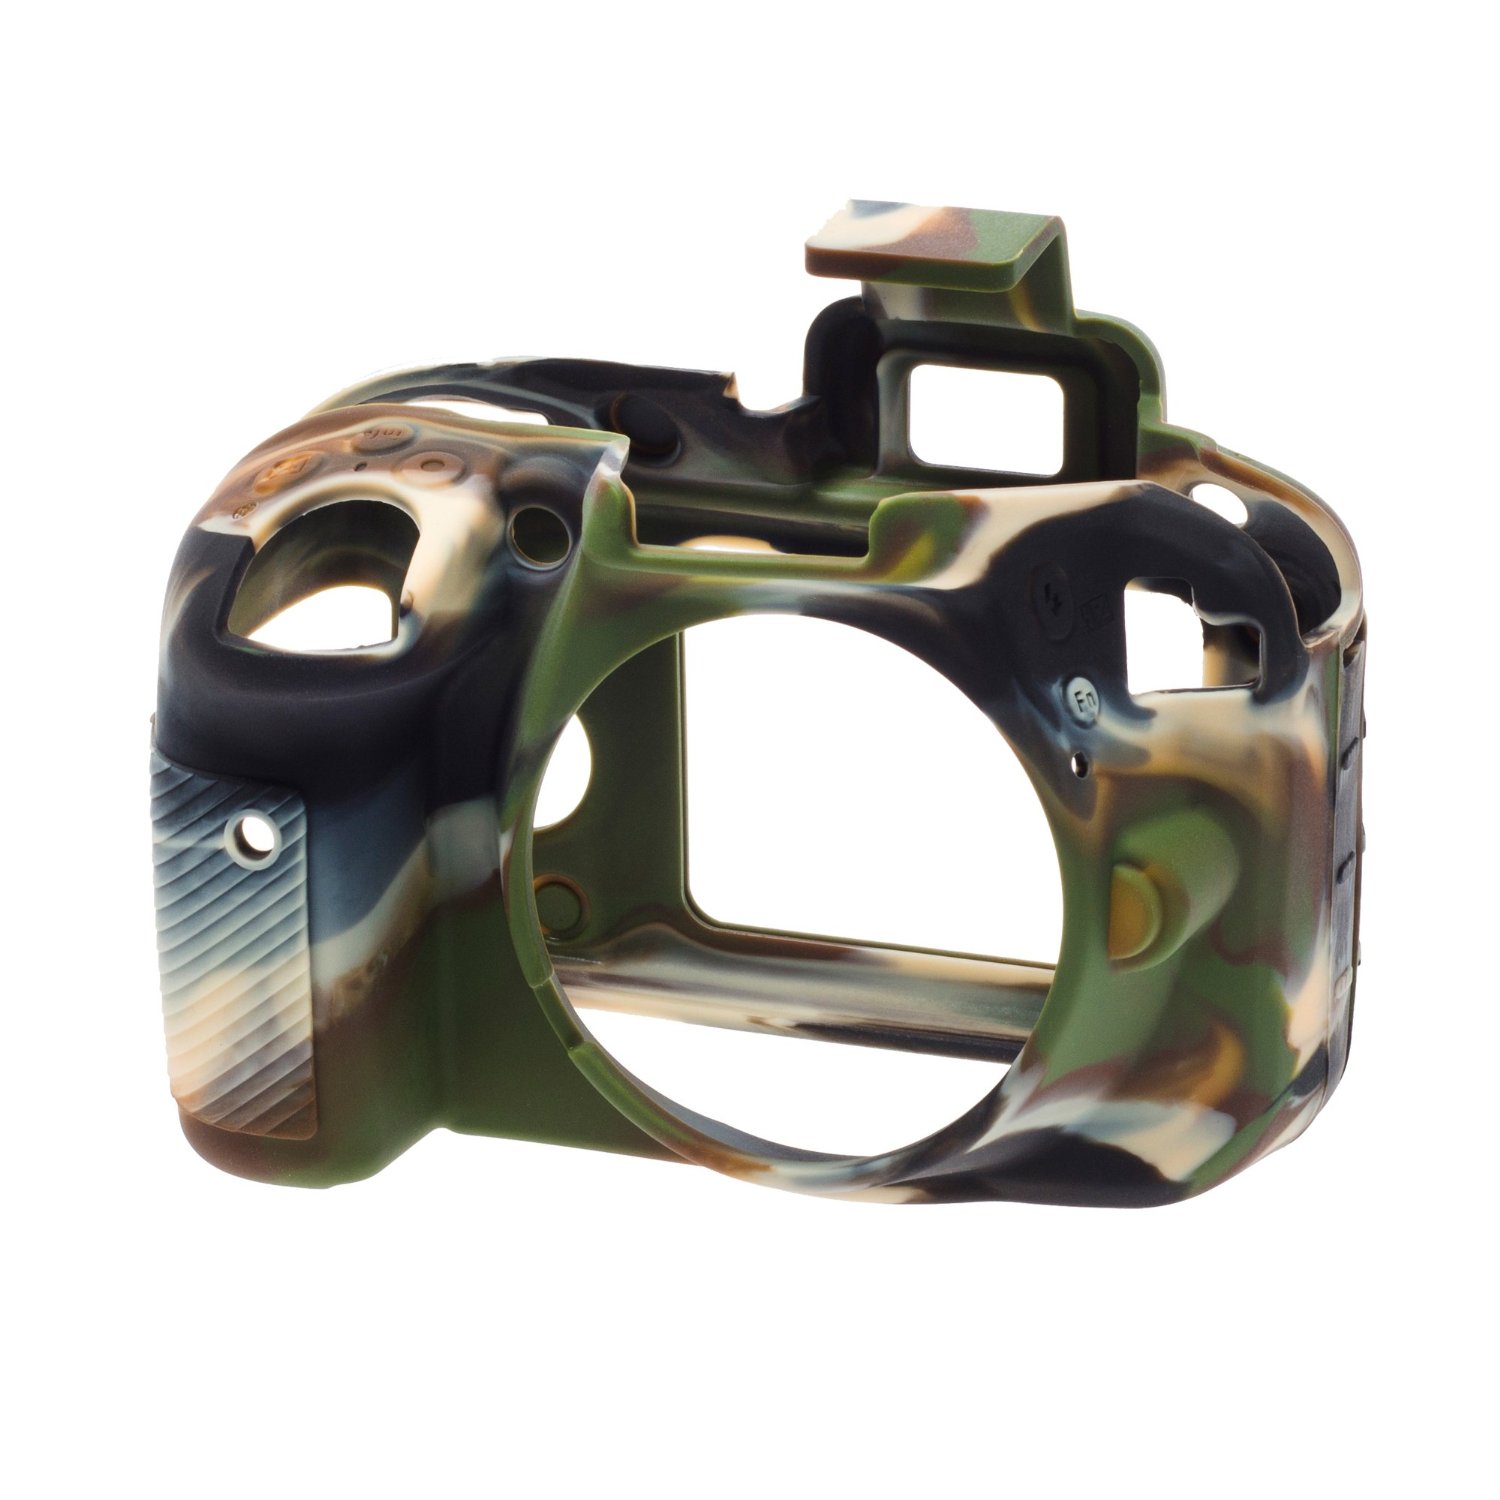 Image of Easycover bodycover for Nikon D3300 Camouflage